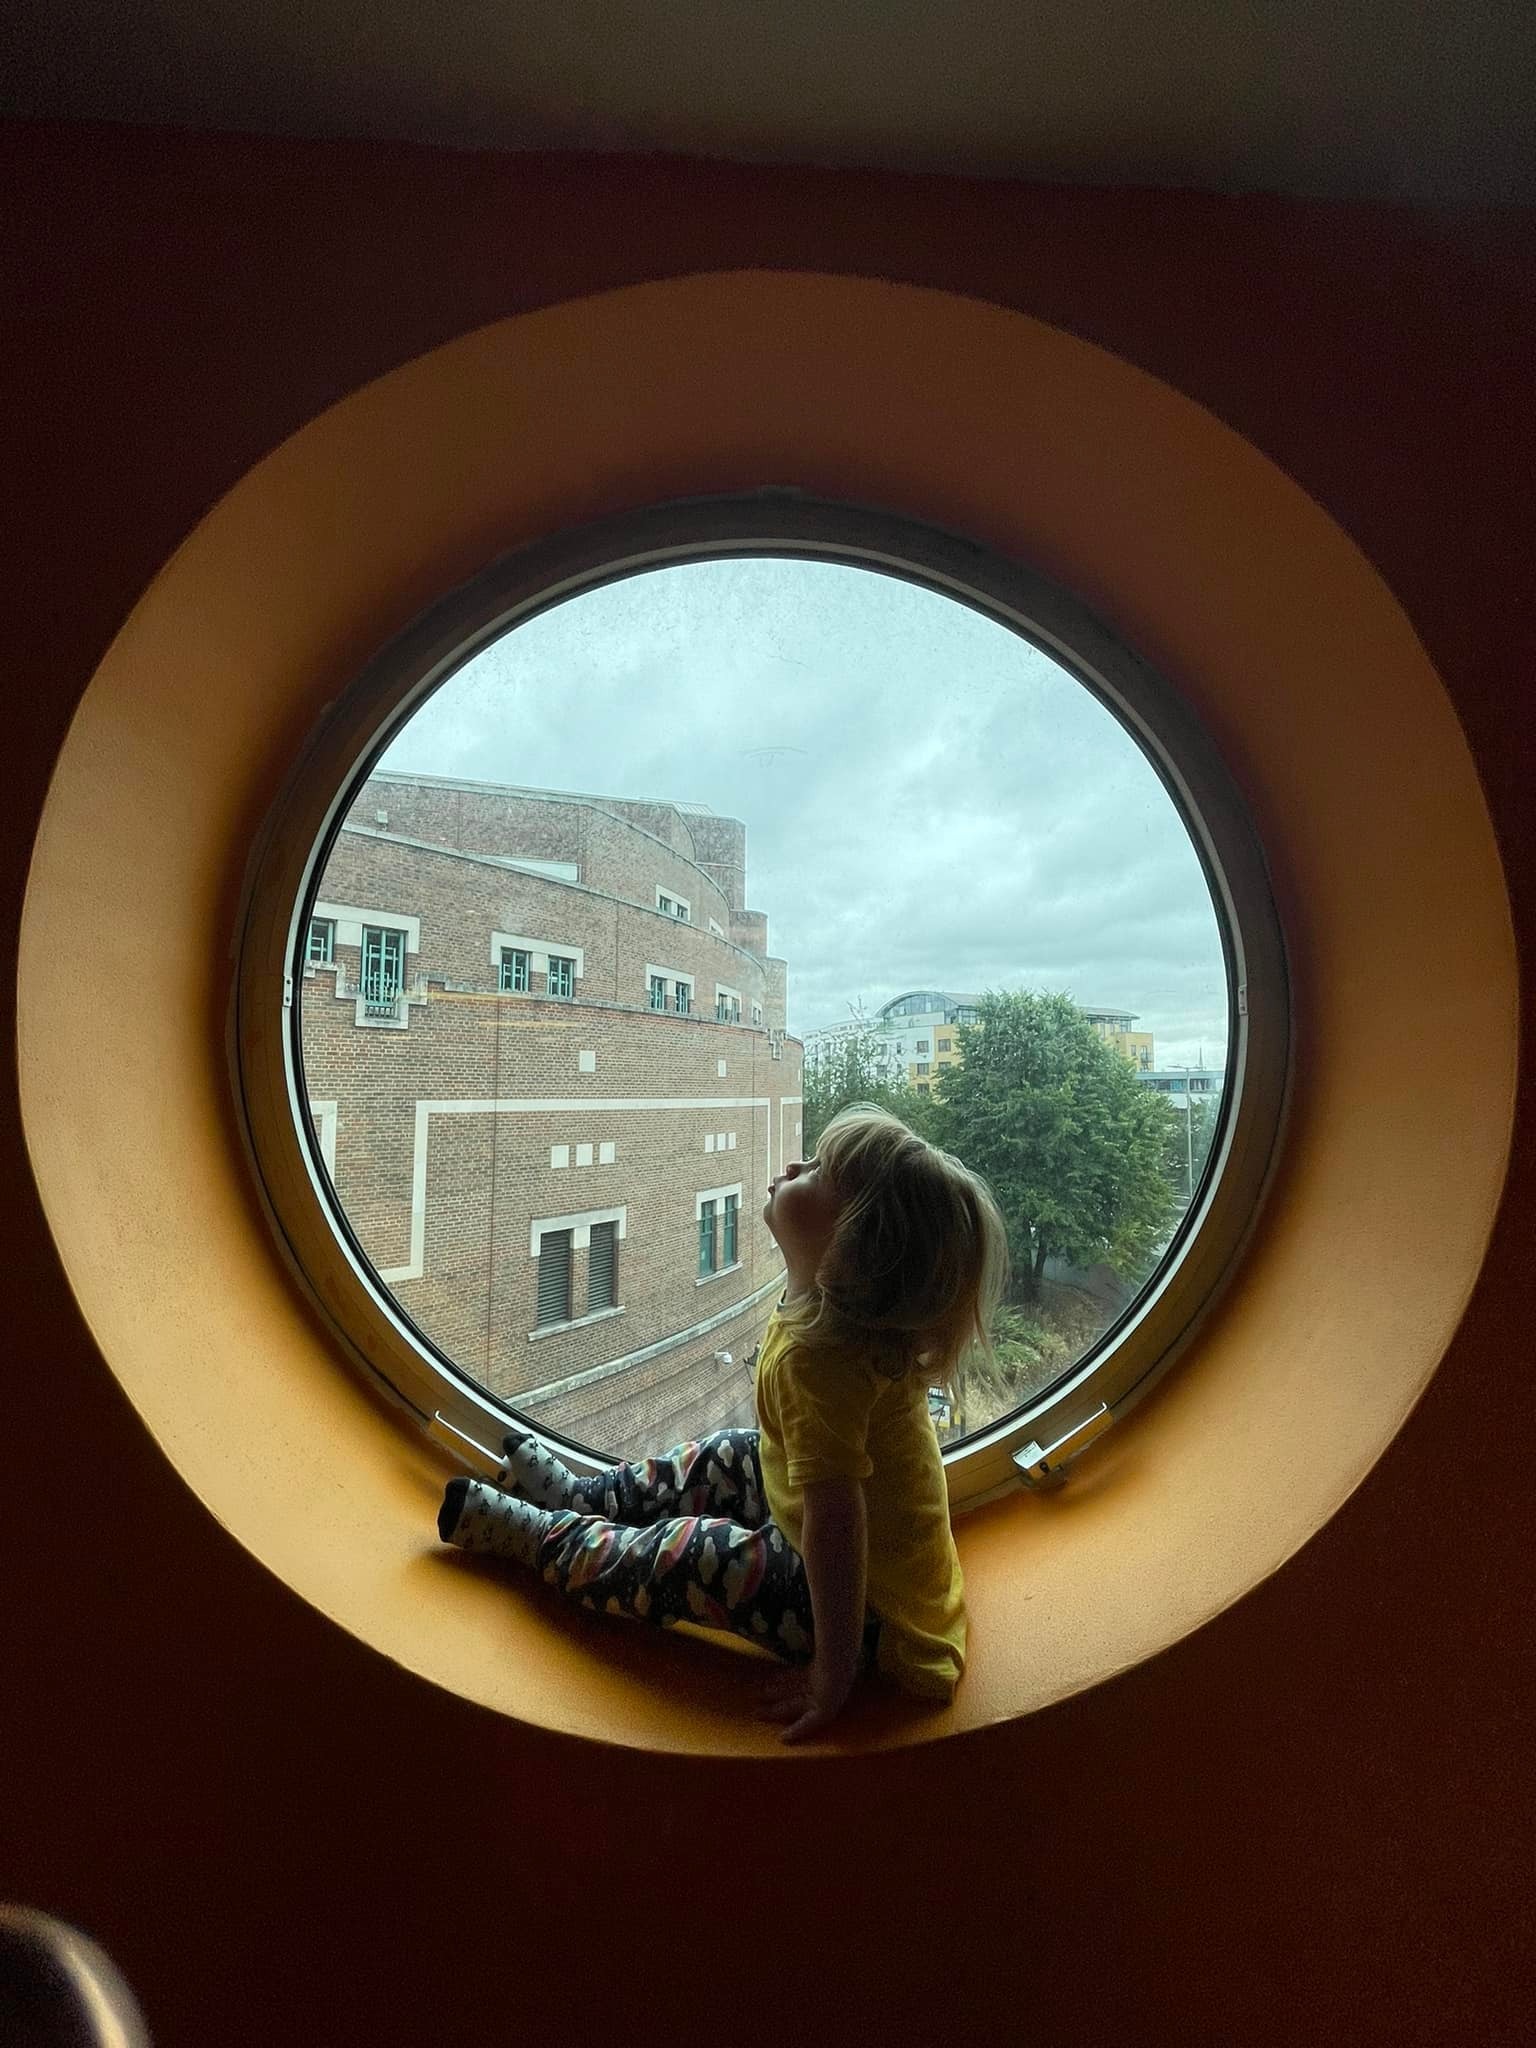 Demelza Slaney: Was inspired the other day with this window and my son obliged!